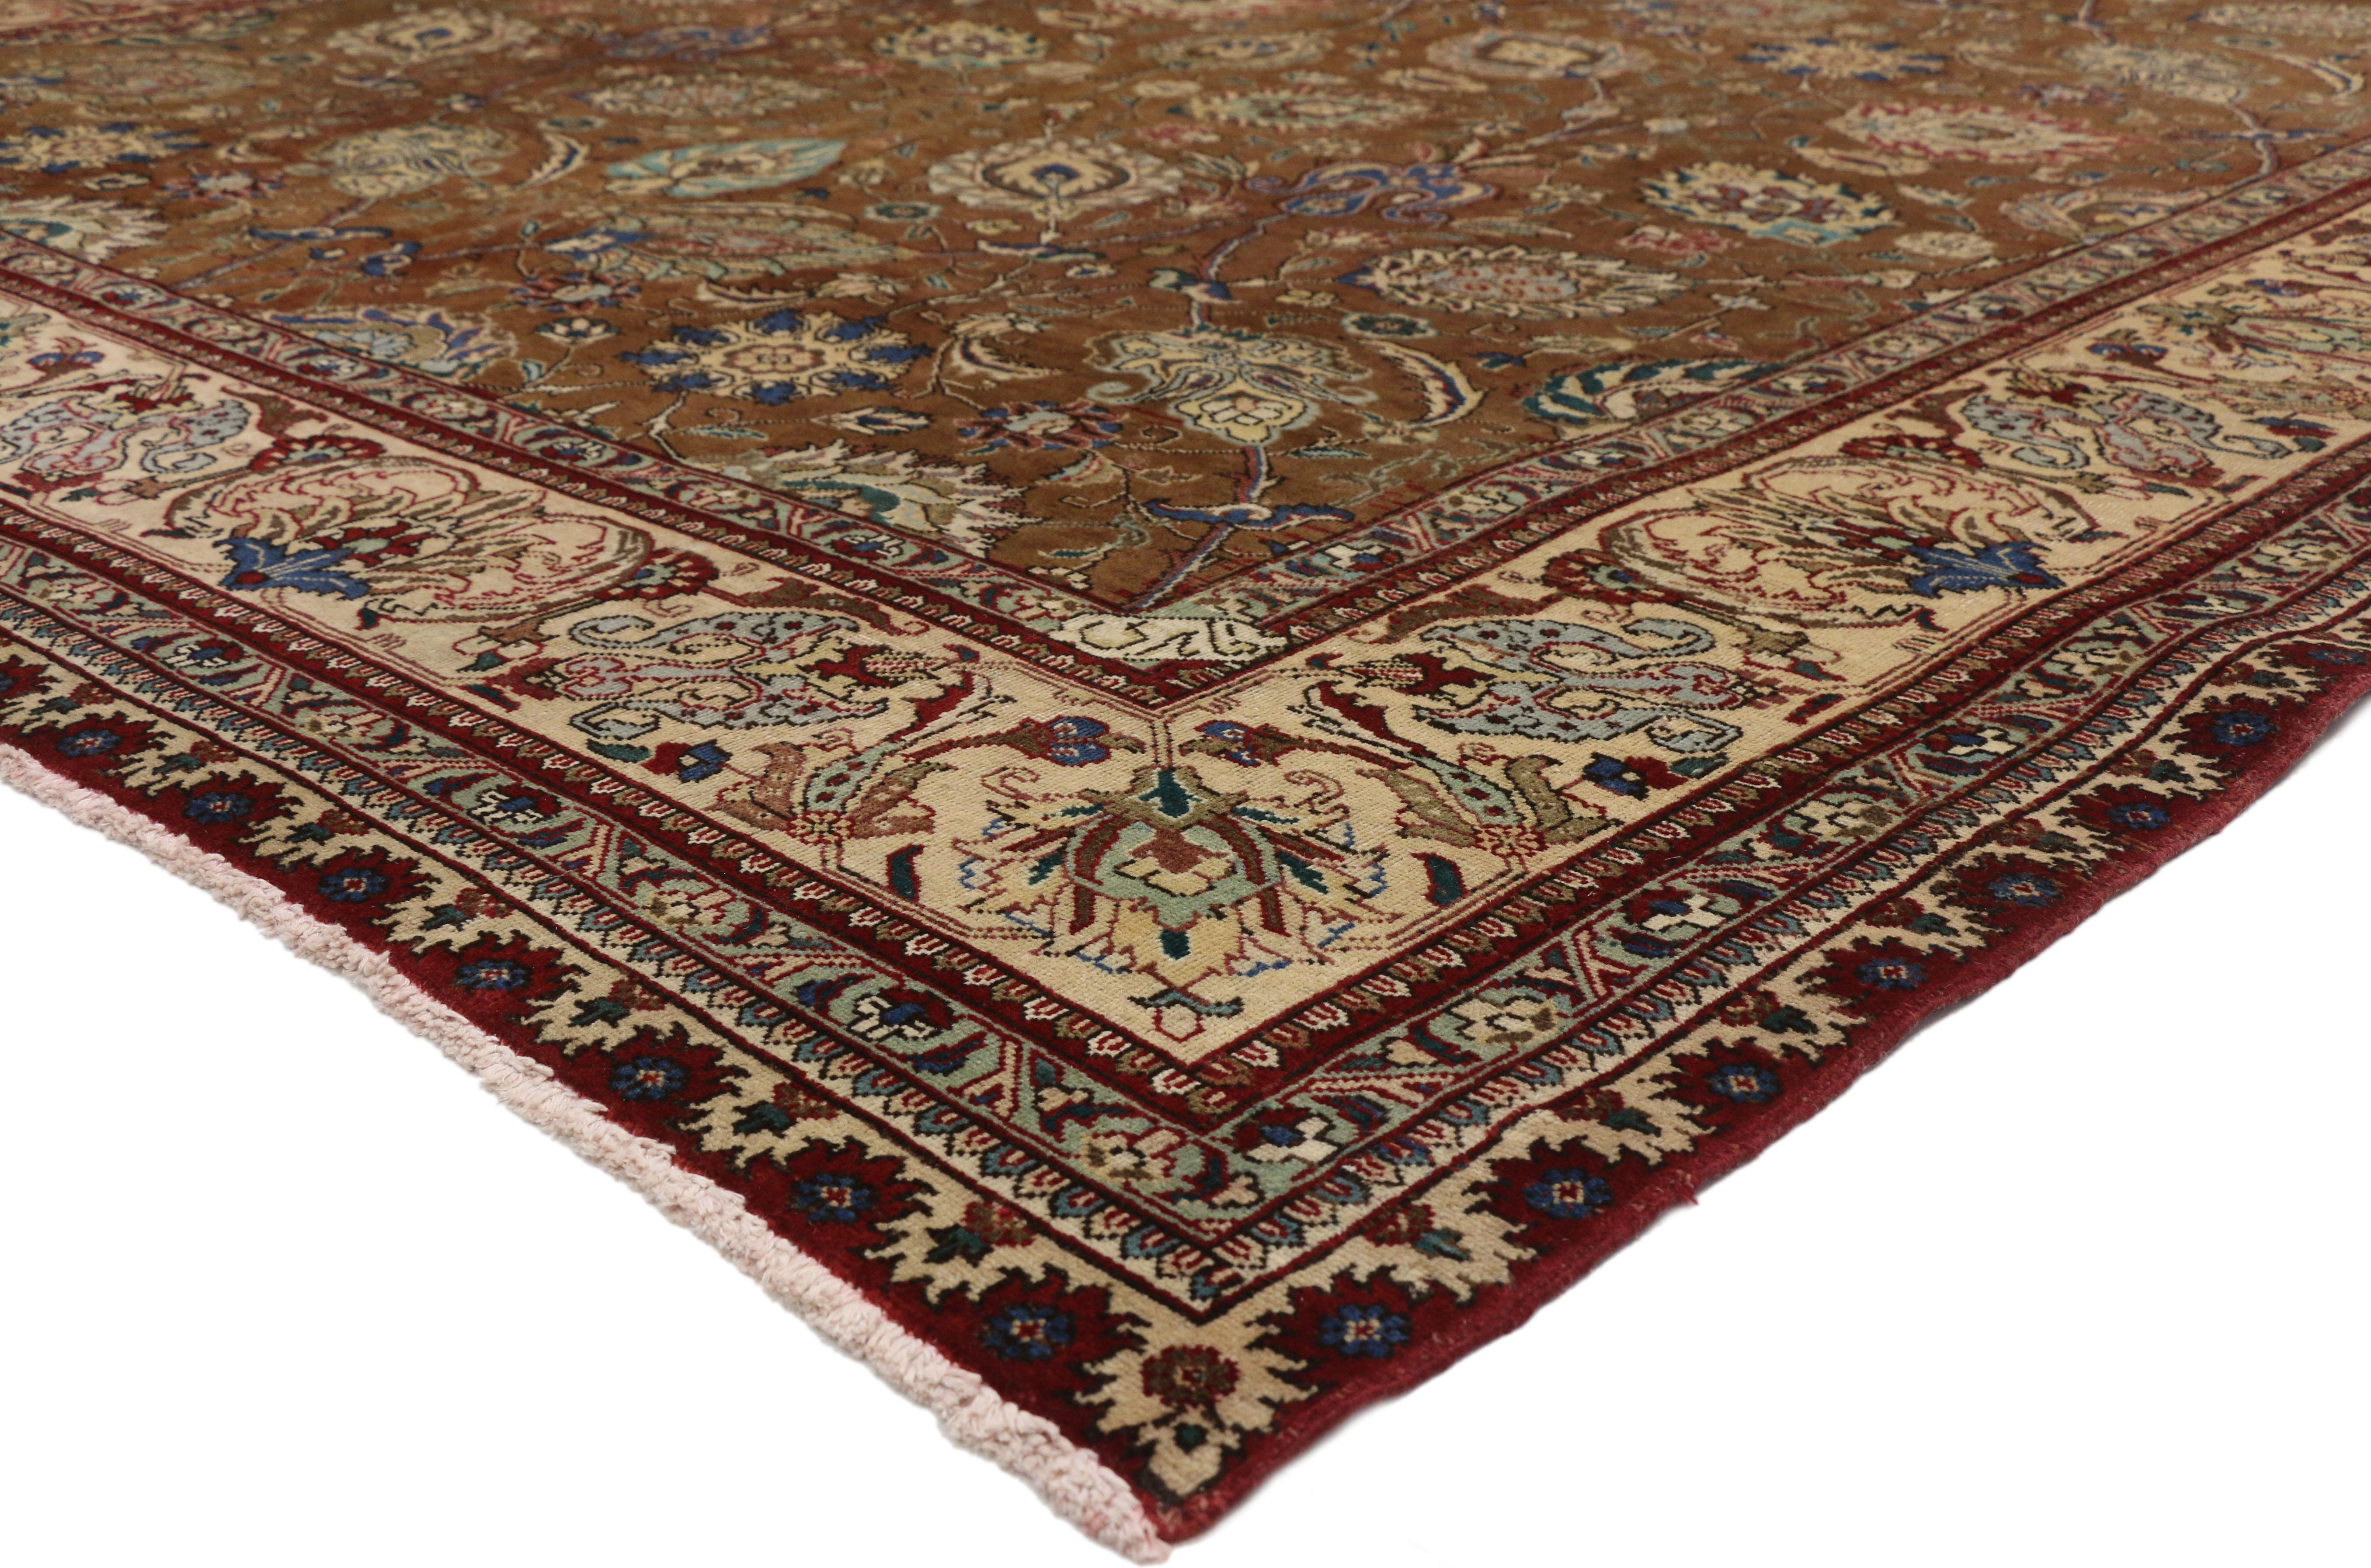 76347 Vintage Persian Tabriz Palace Rug with Arabesque Art Nouveau Style. This luxurious vintage Persian Tabriz palace rug features an arabesque Art Nouveau style and refined colors. With its intricate Shah Abbasi palmettes dancing gracefully with